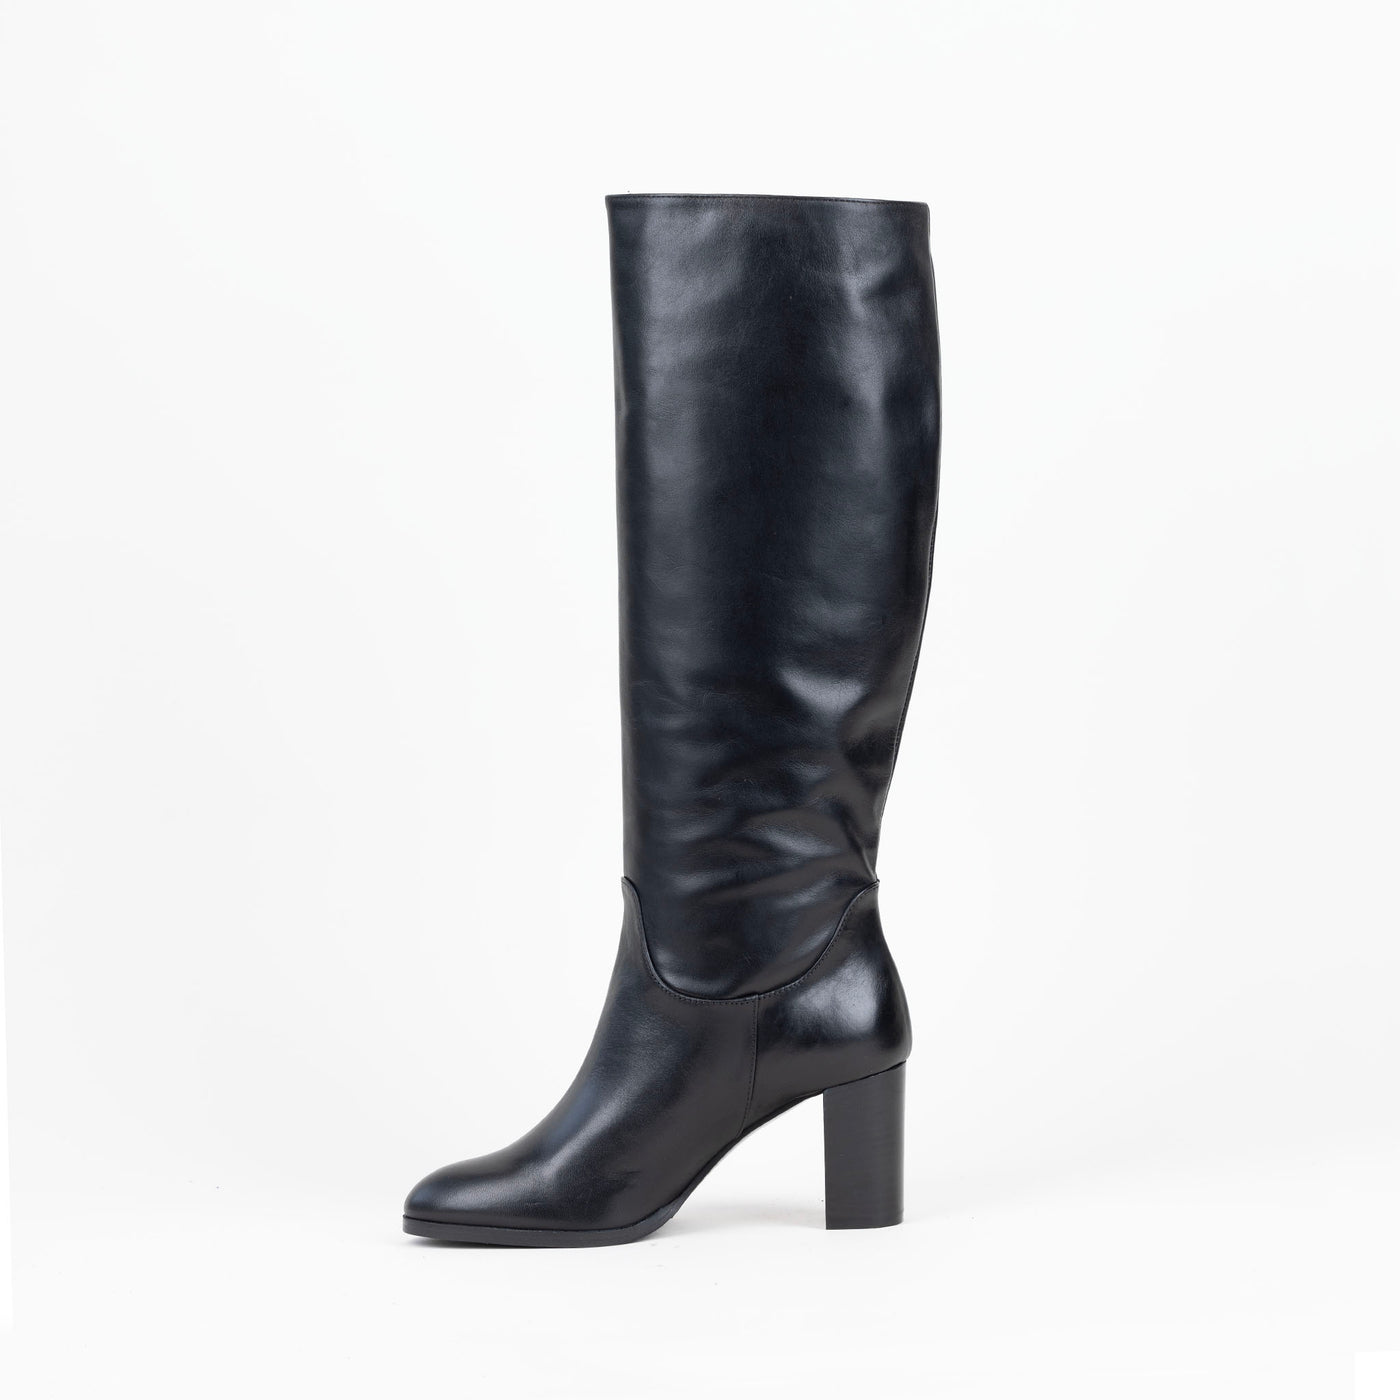 Riding inspired black leather boot with block heel